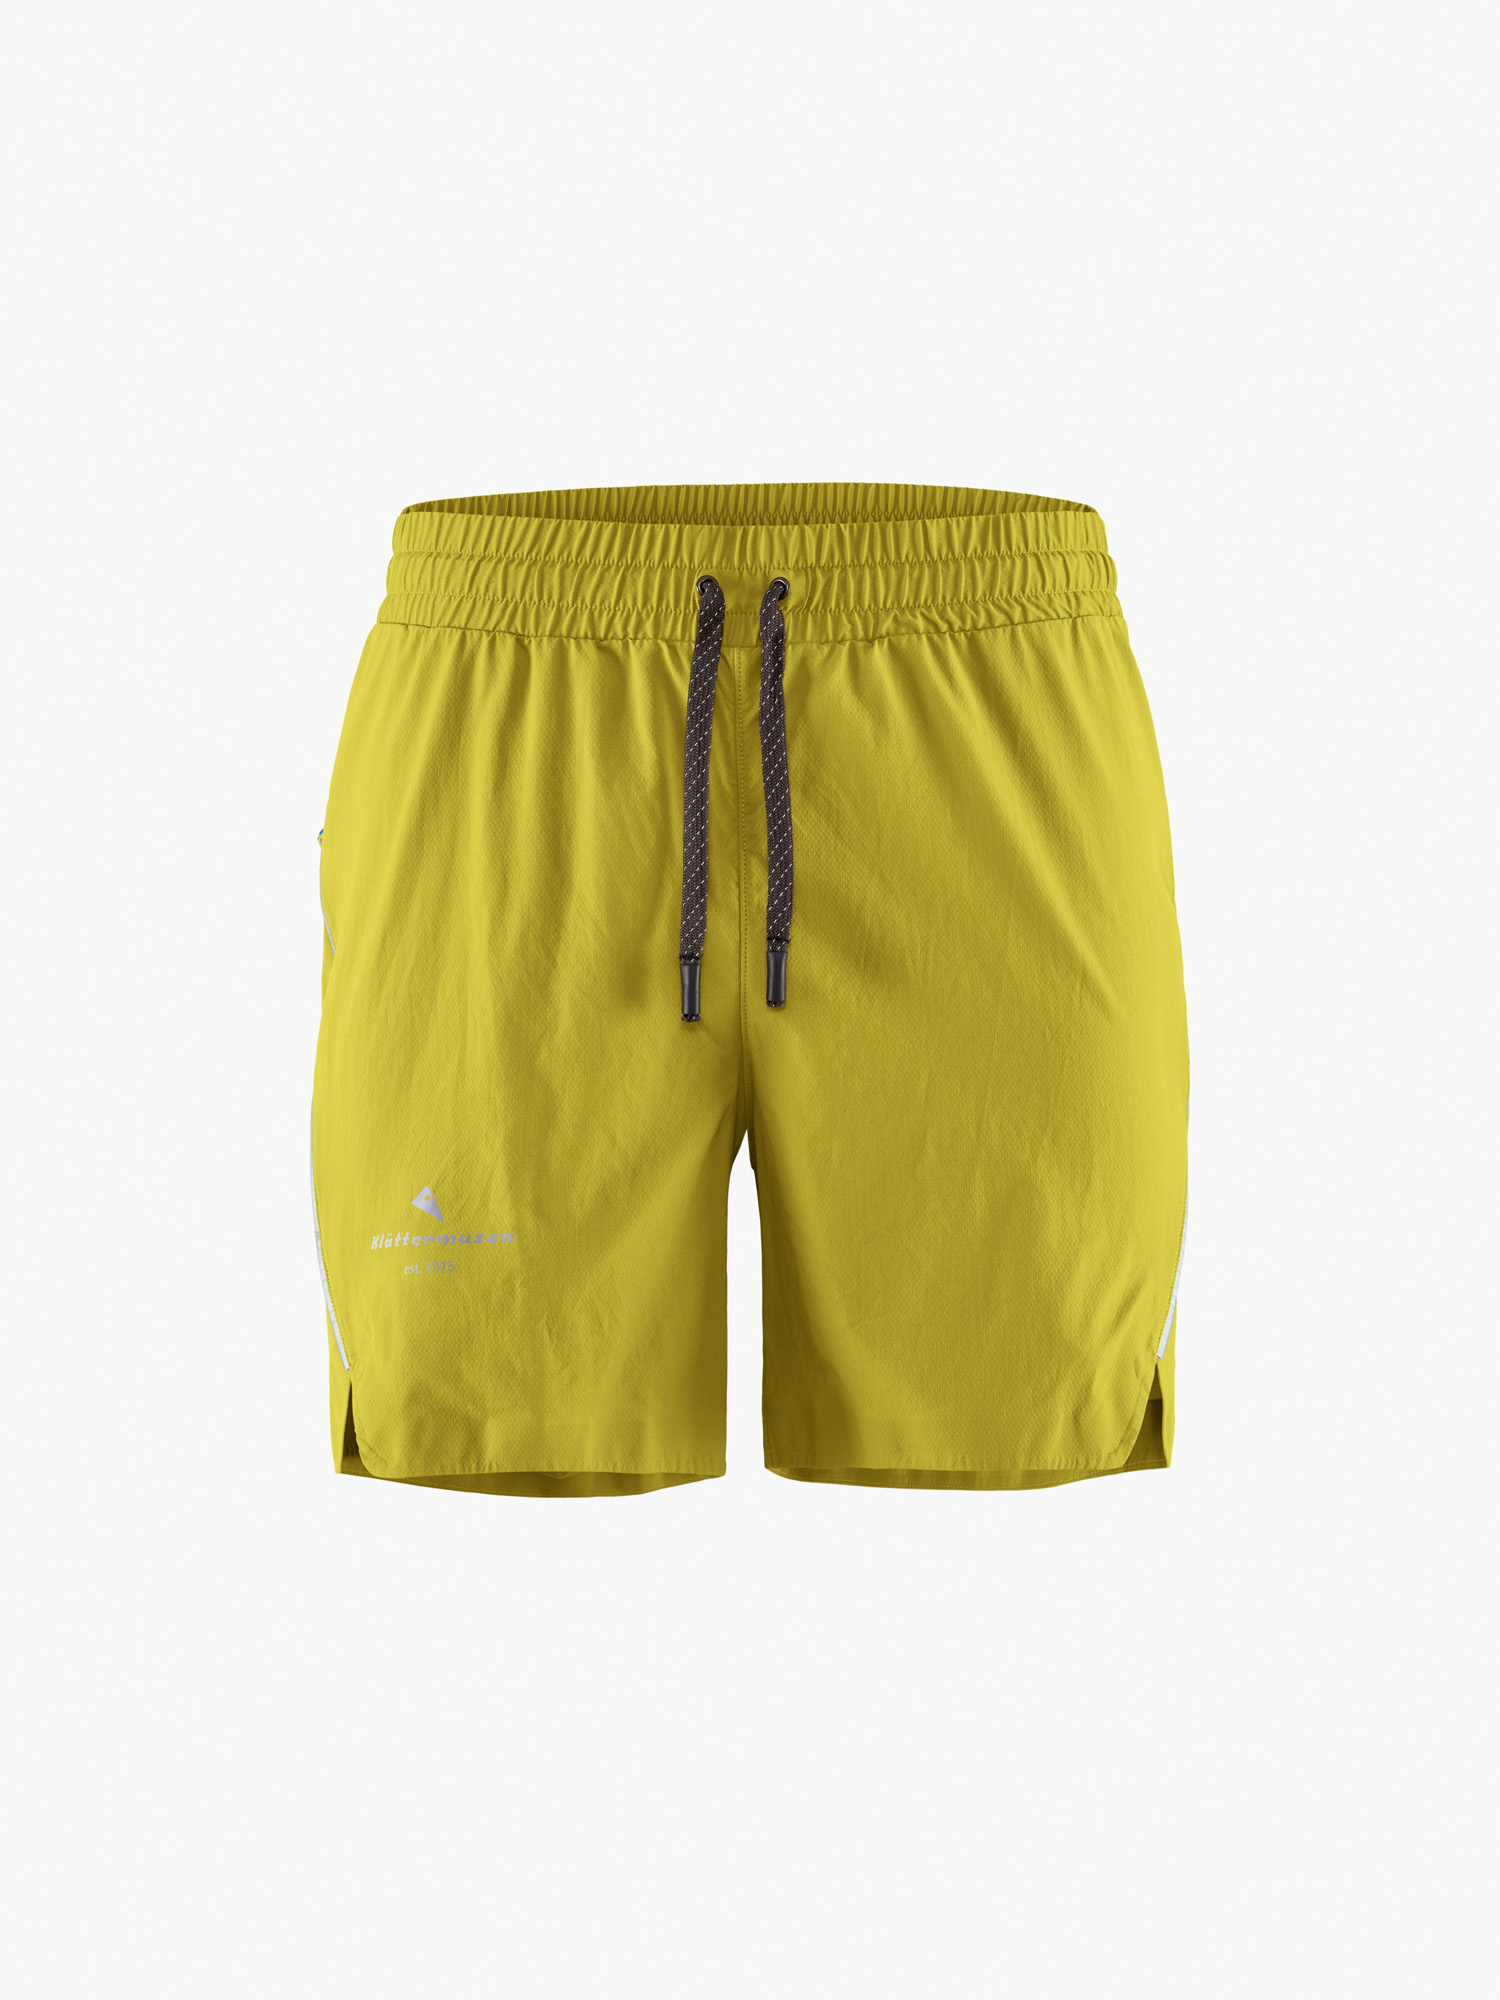 10112 - 74 Levitend Fast Shorts M's - Pine Sprout